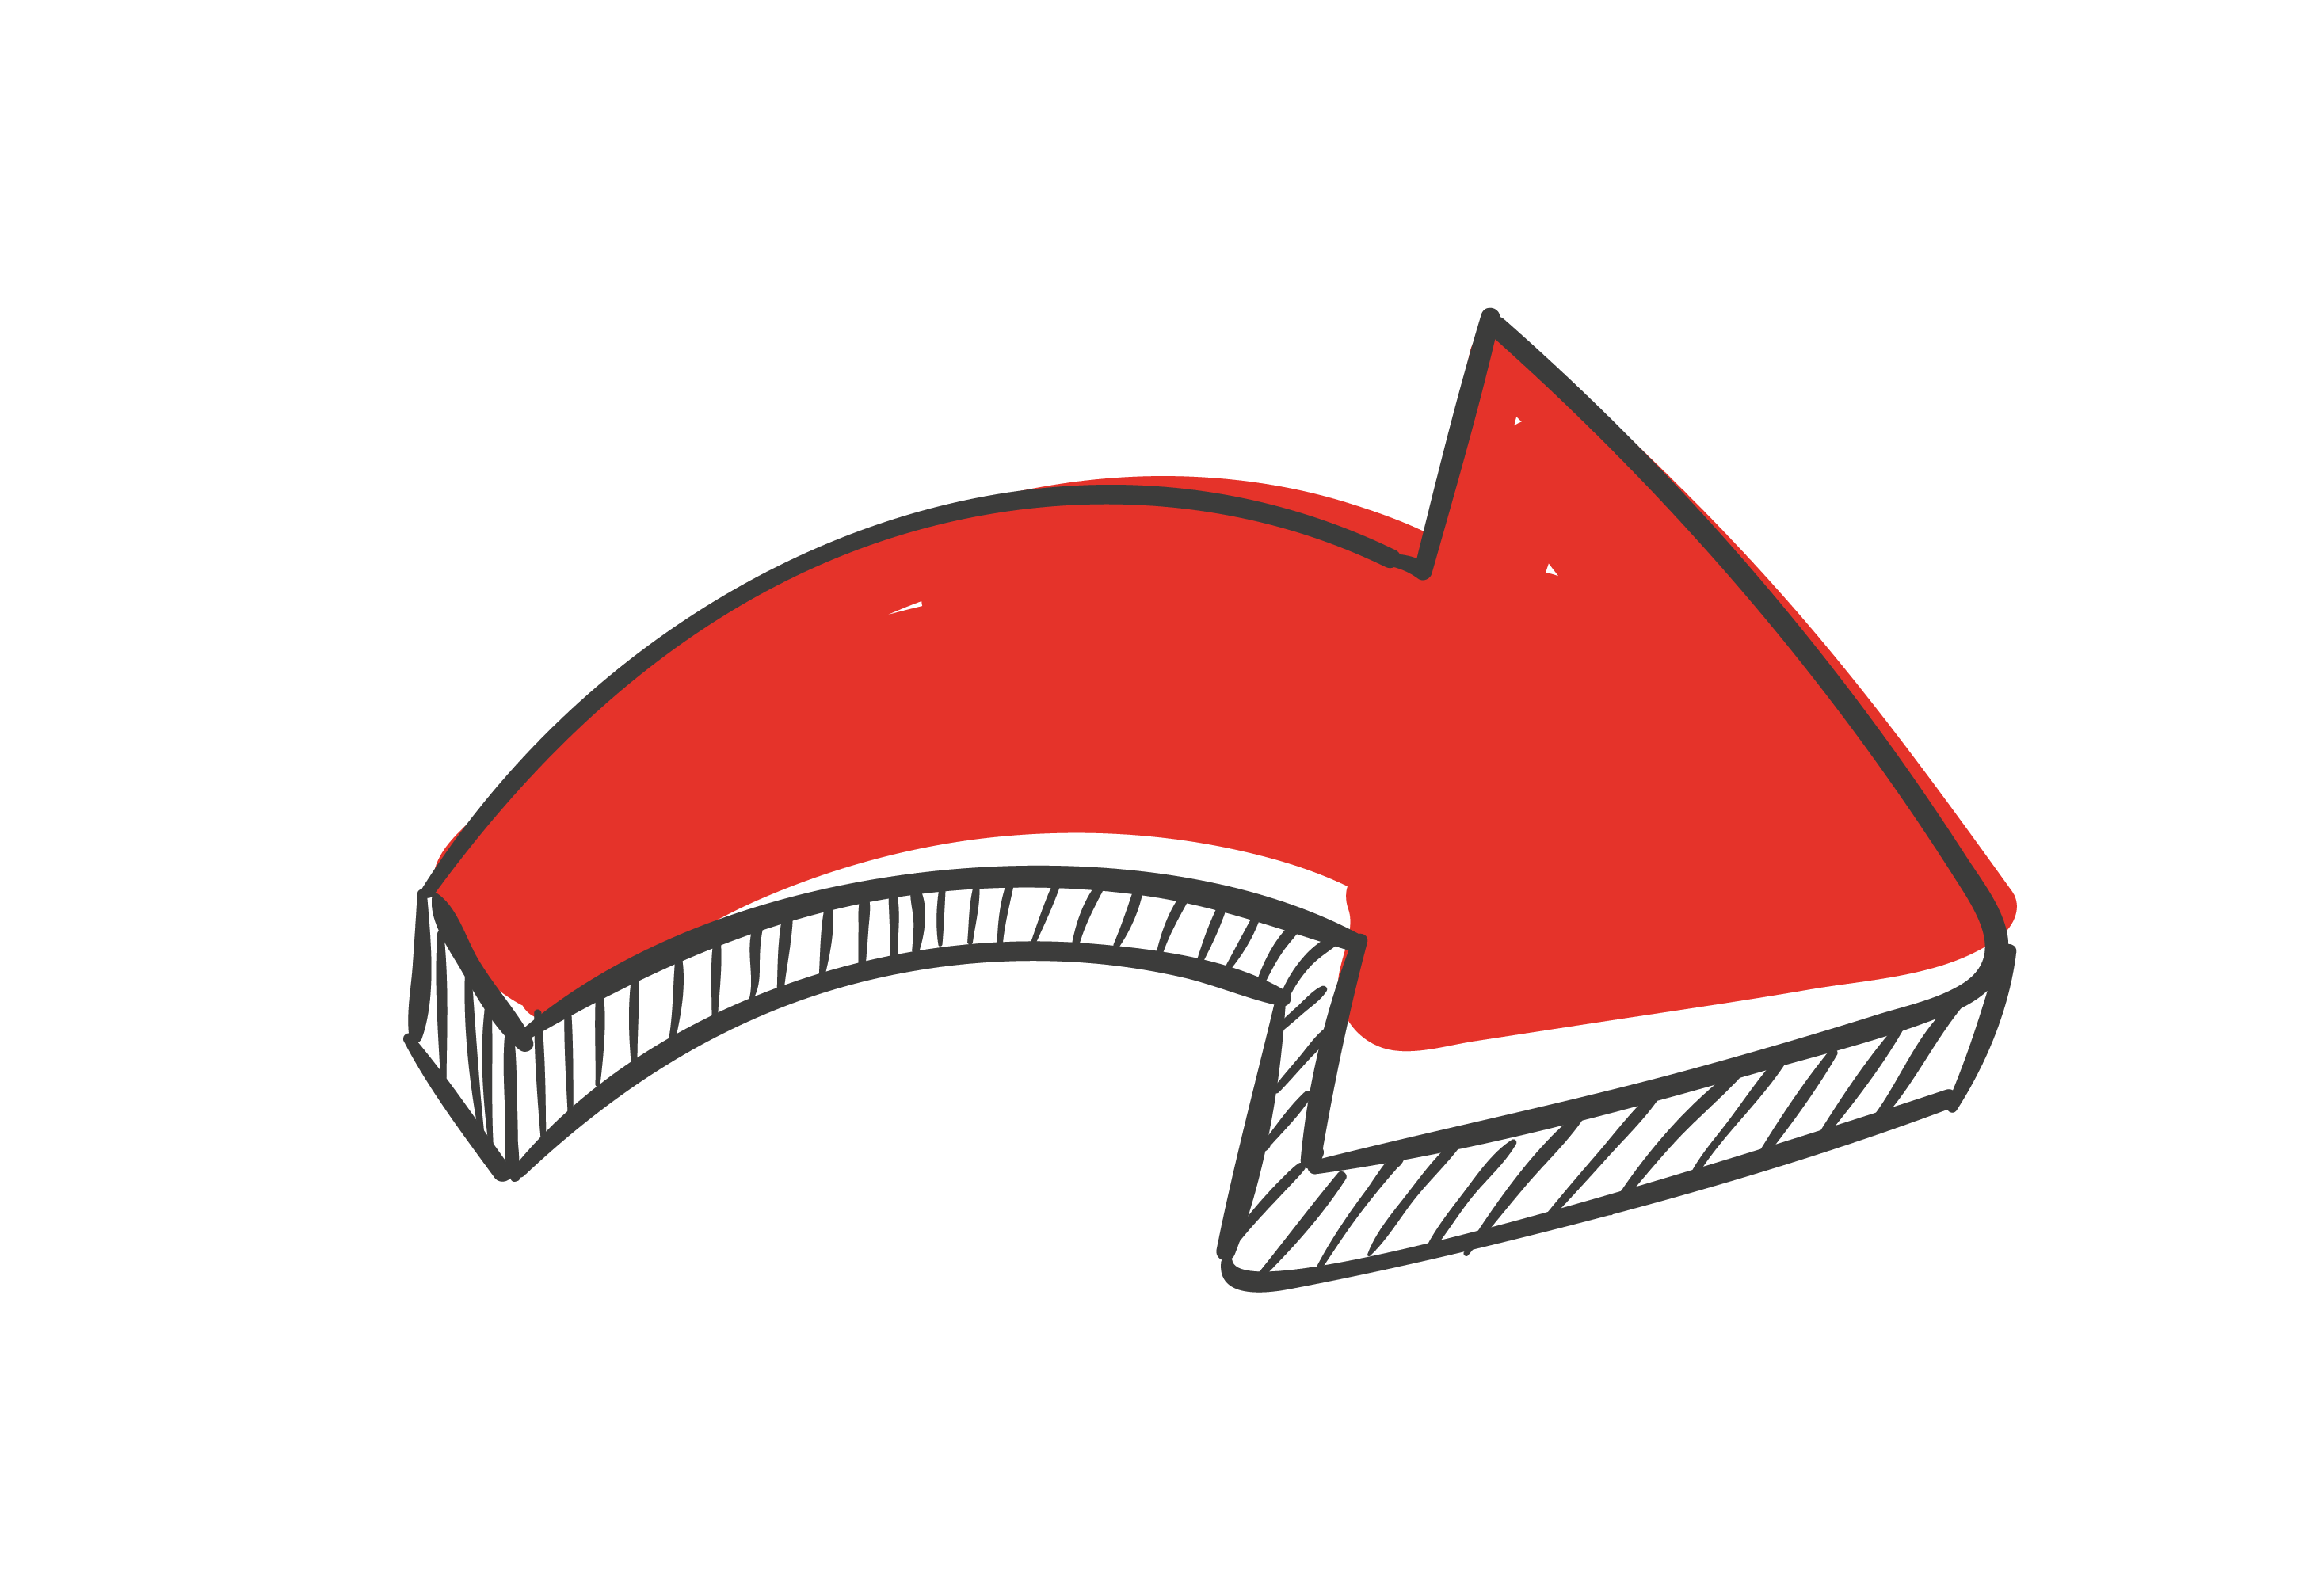 Web Design Red Arrow Automotive PNG Image High Quality PNG Image